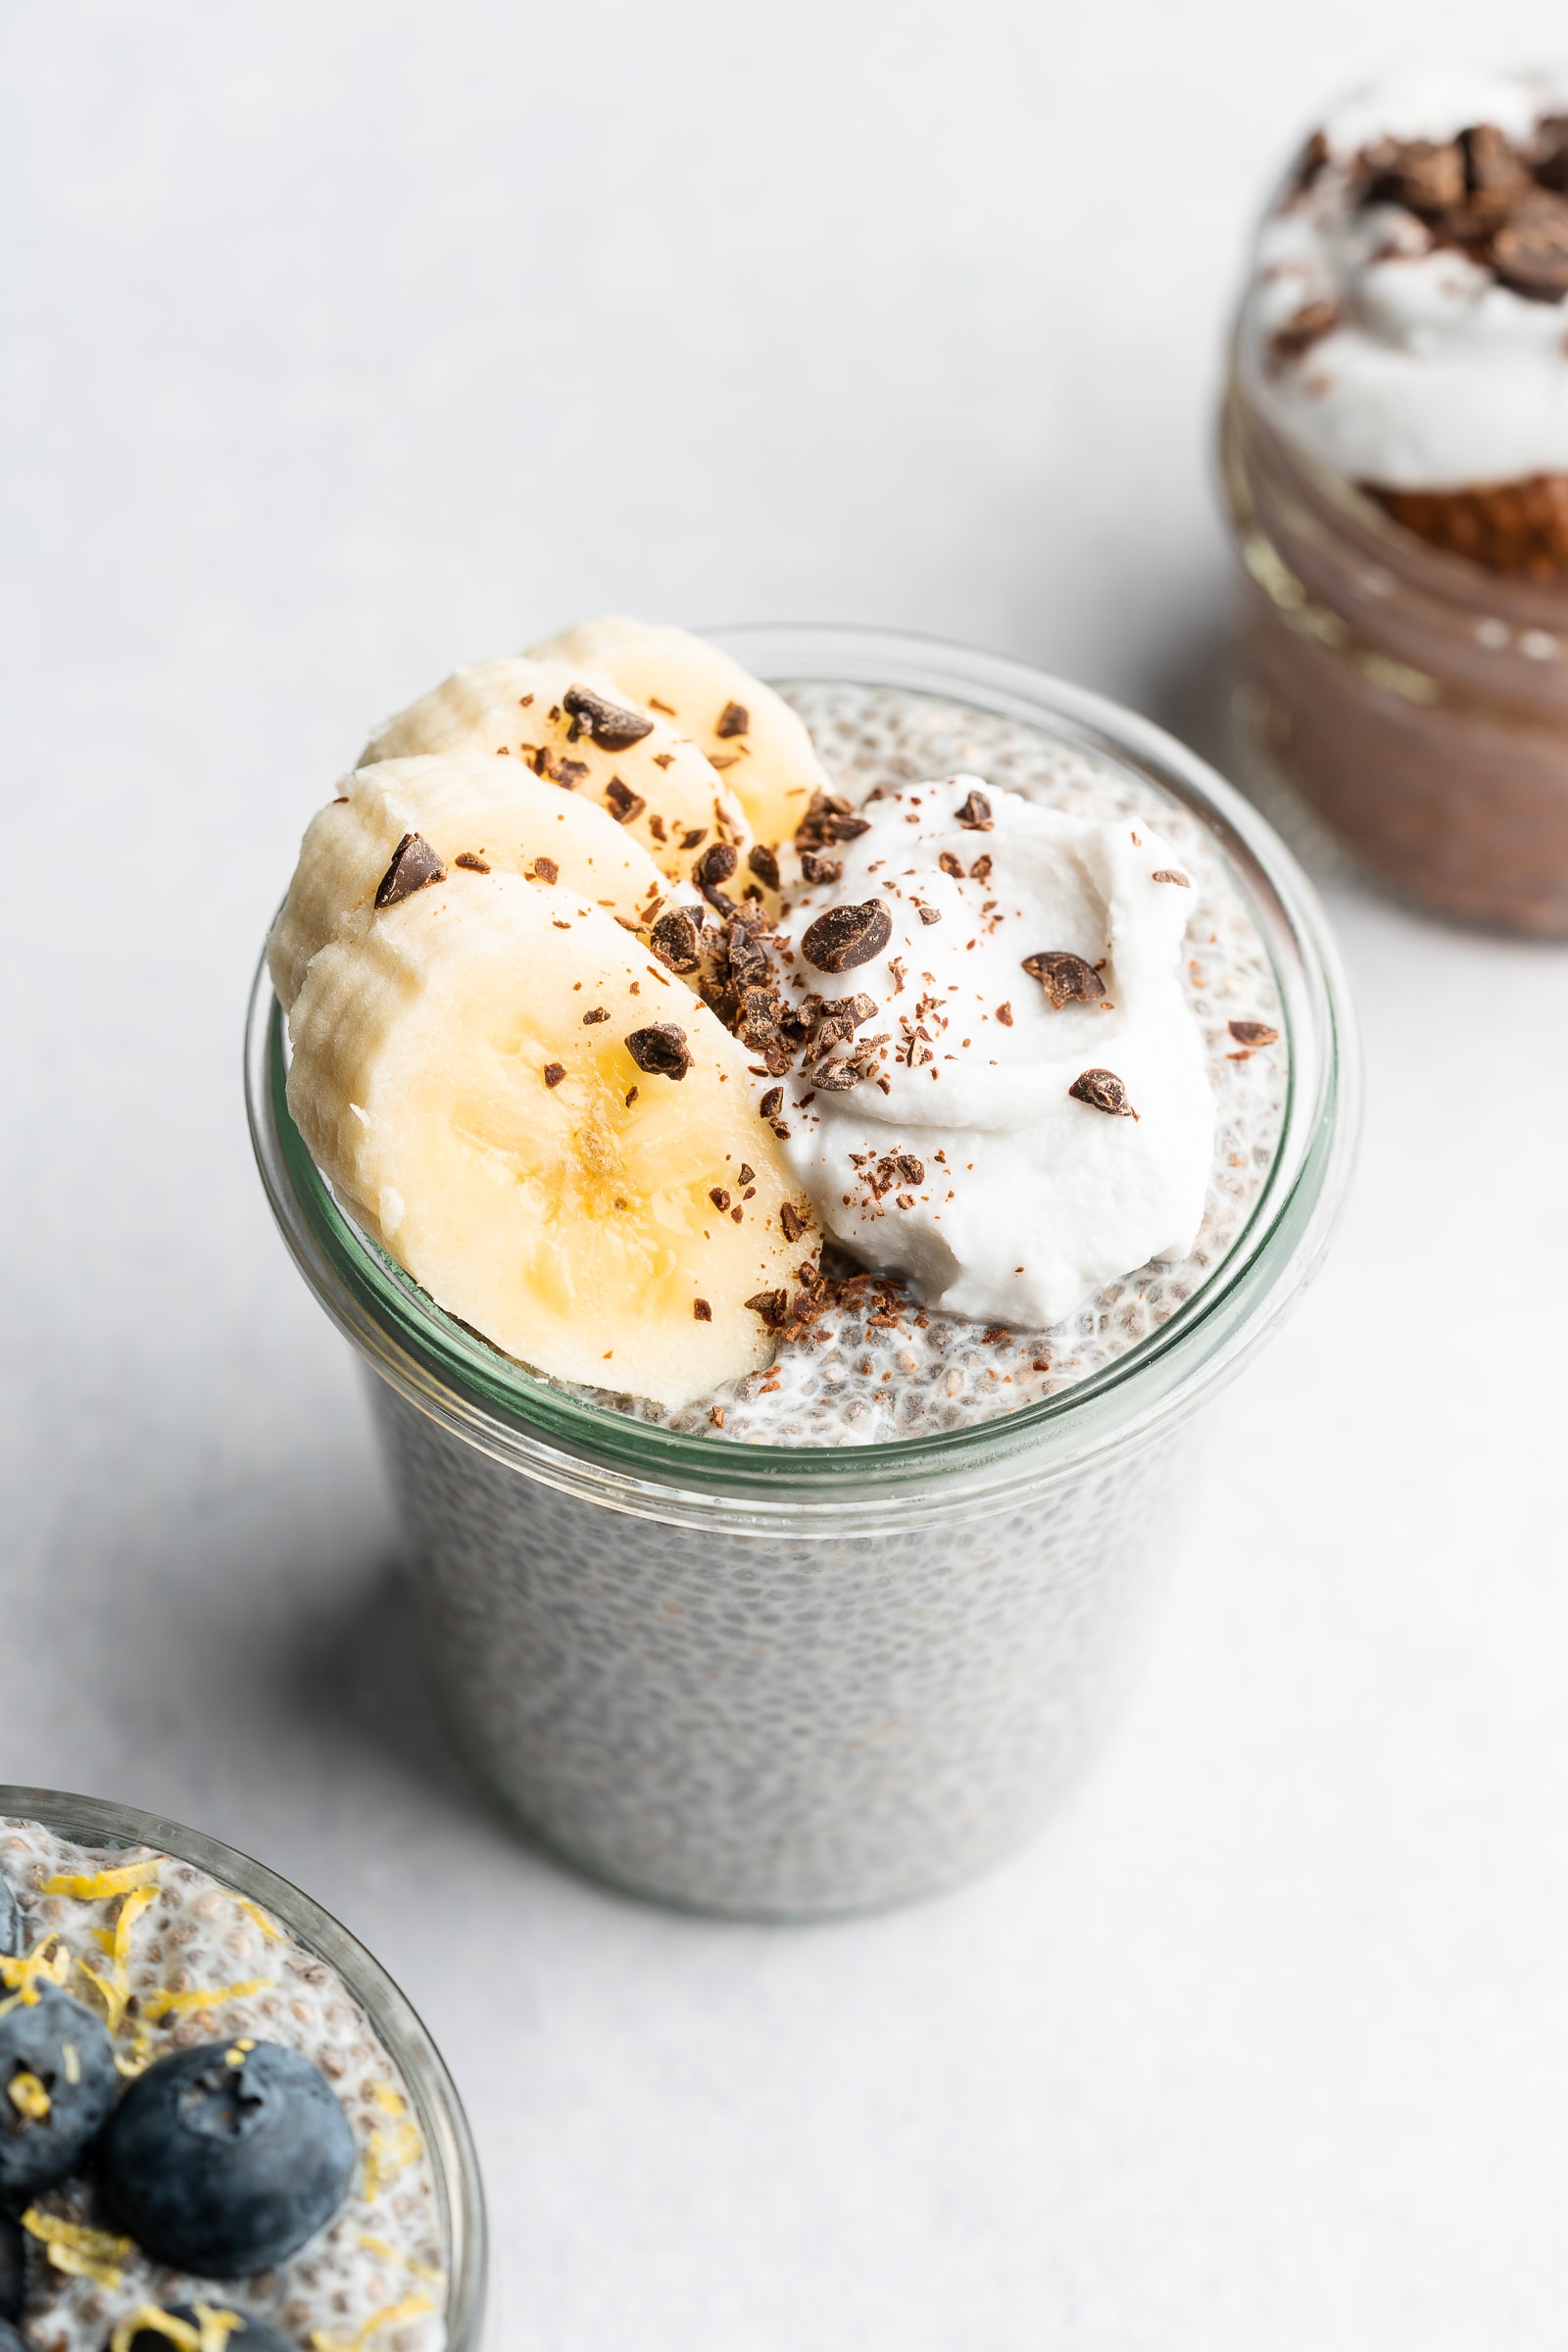 Chia seed pudding topped with banana slices, coconut whip, and chocolate chips.